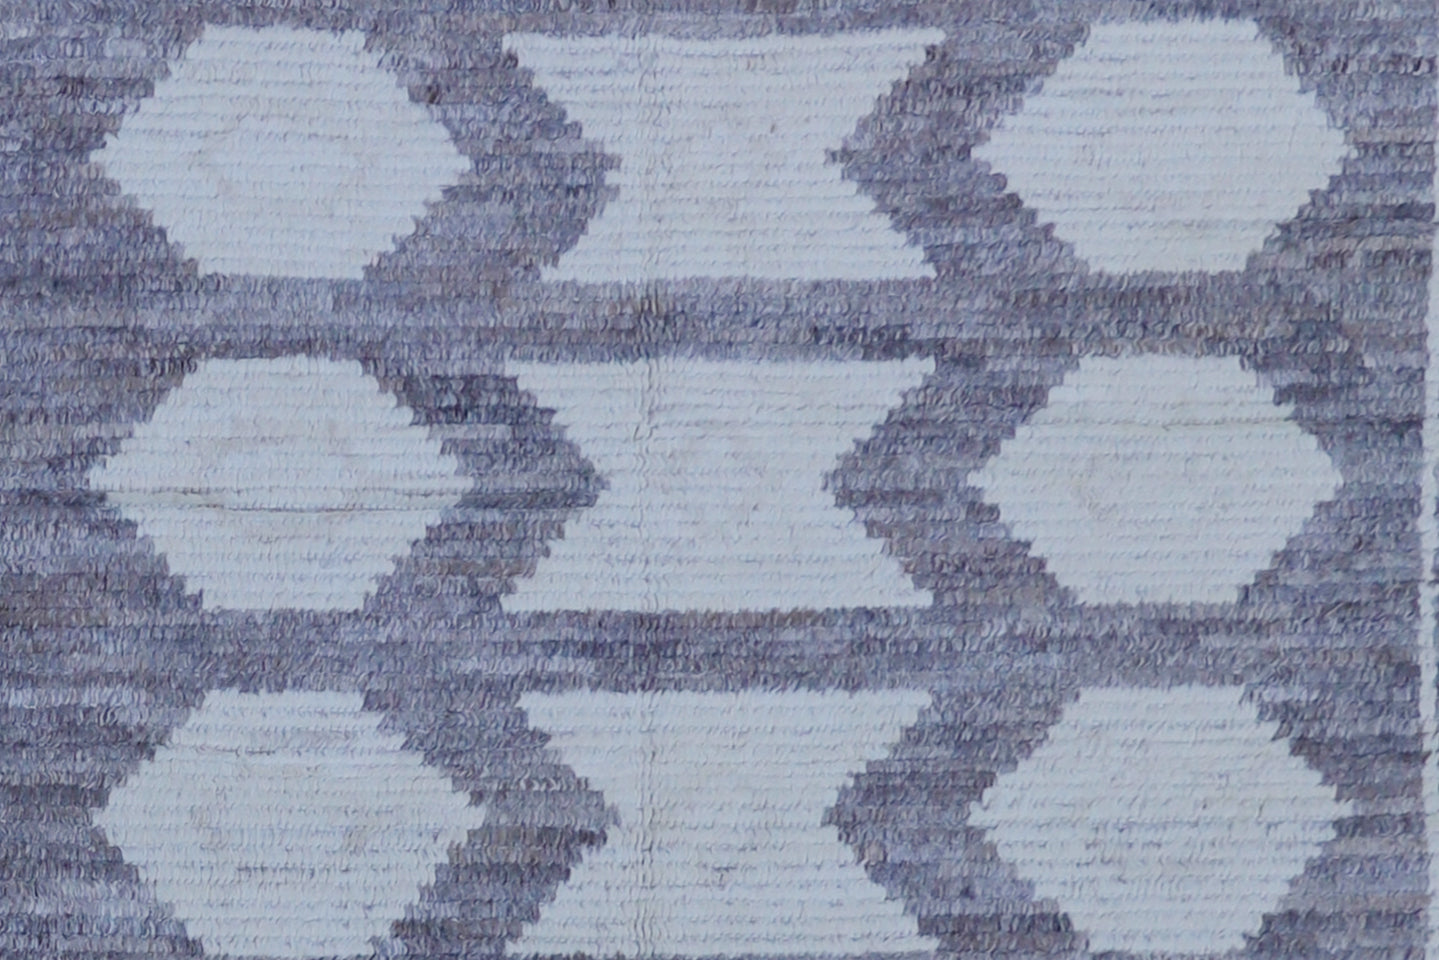 9'x12' Ariana Moroccan Geometric Ivory and Gray Barchi Rug